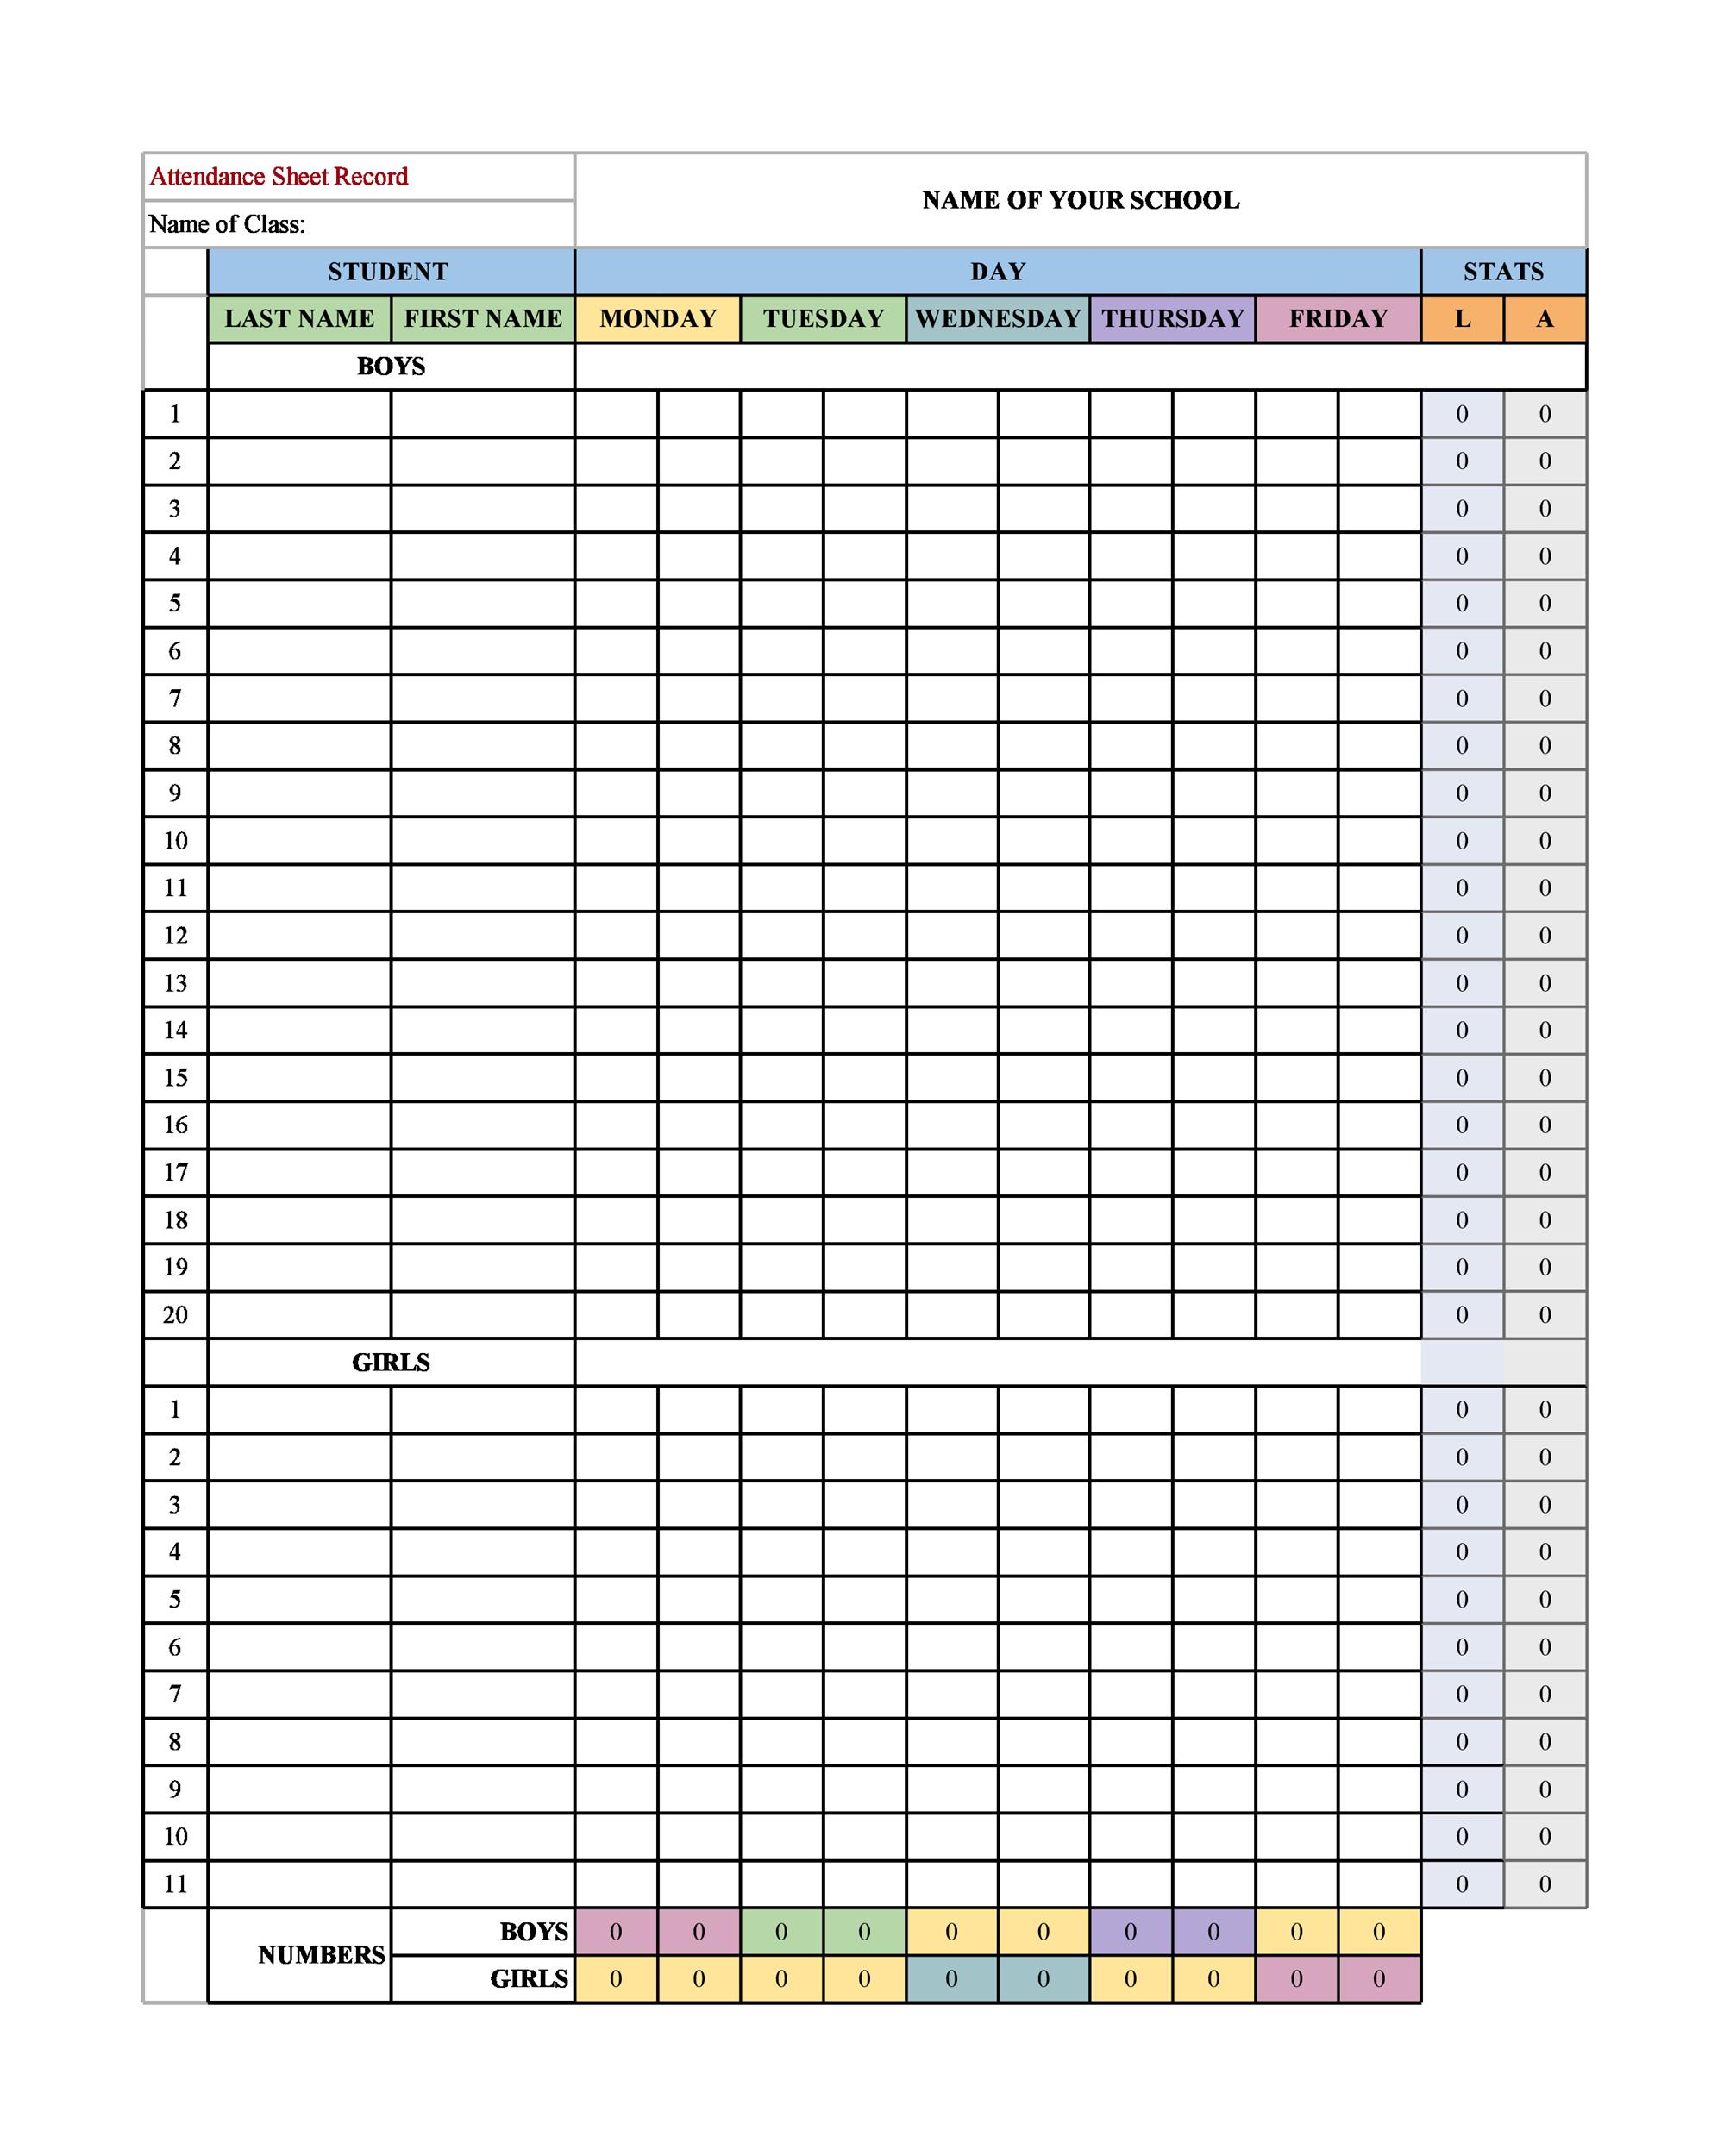 printable-attendance-form-printable-forms-free-online